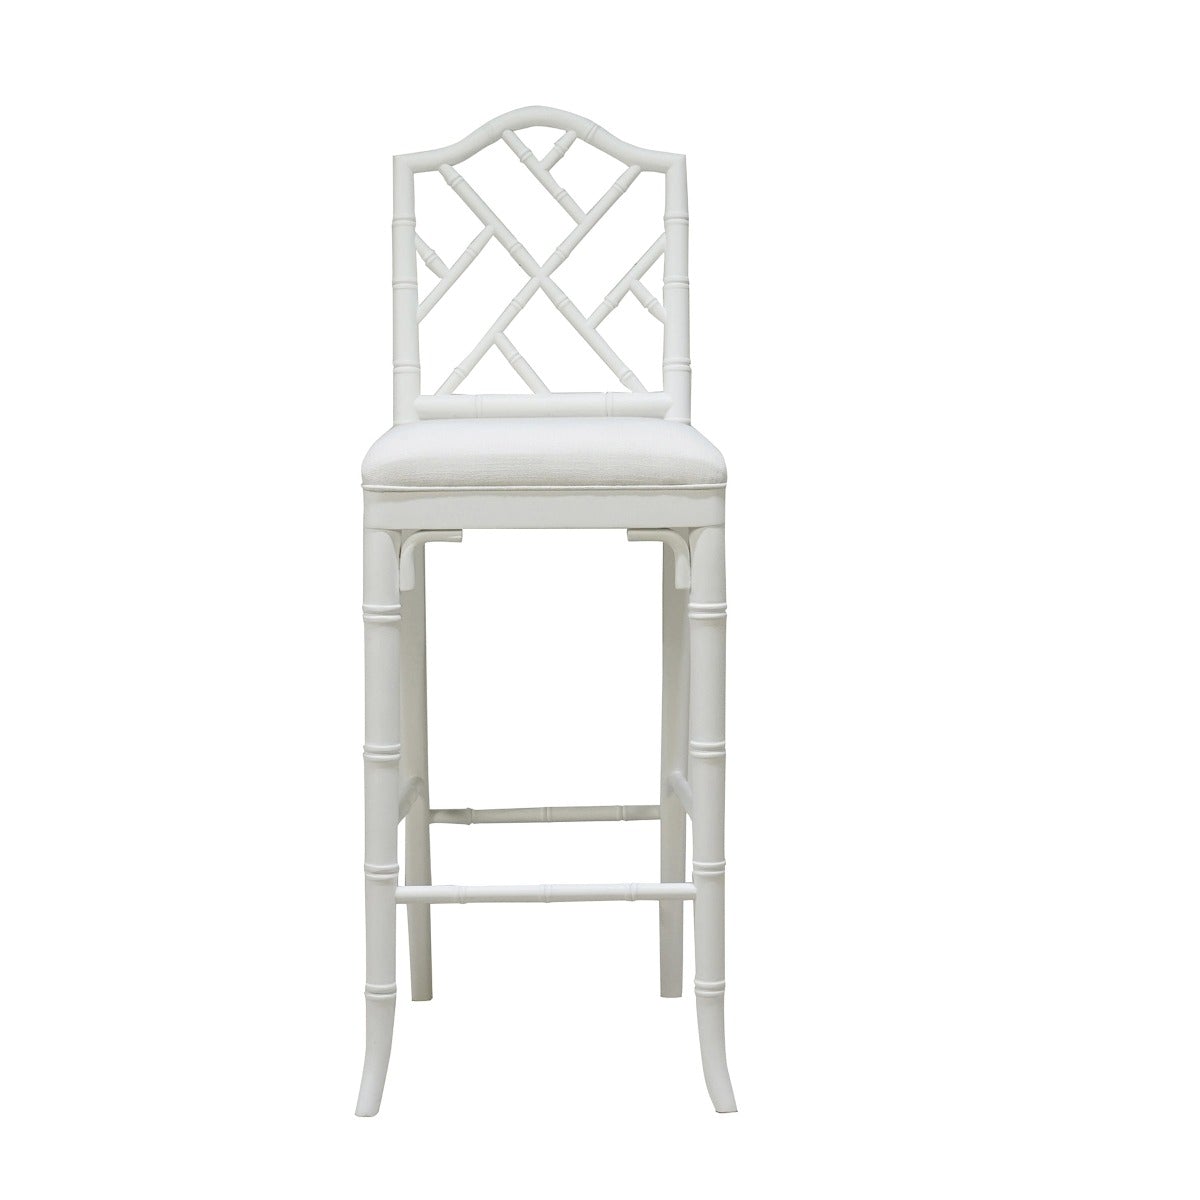 Chippendale Counter Stool Matte White Lacquer. Front view.